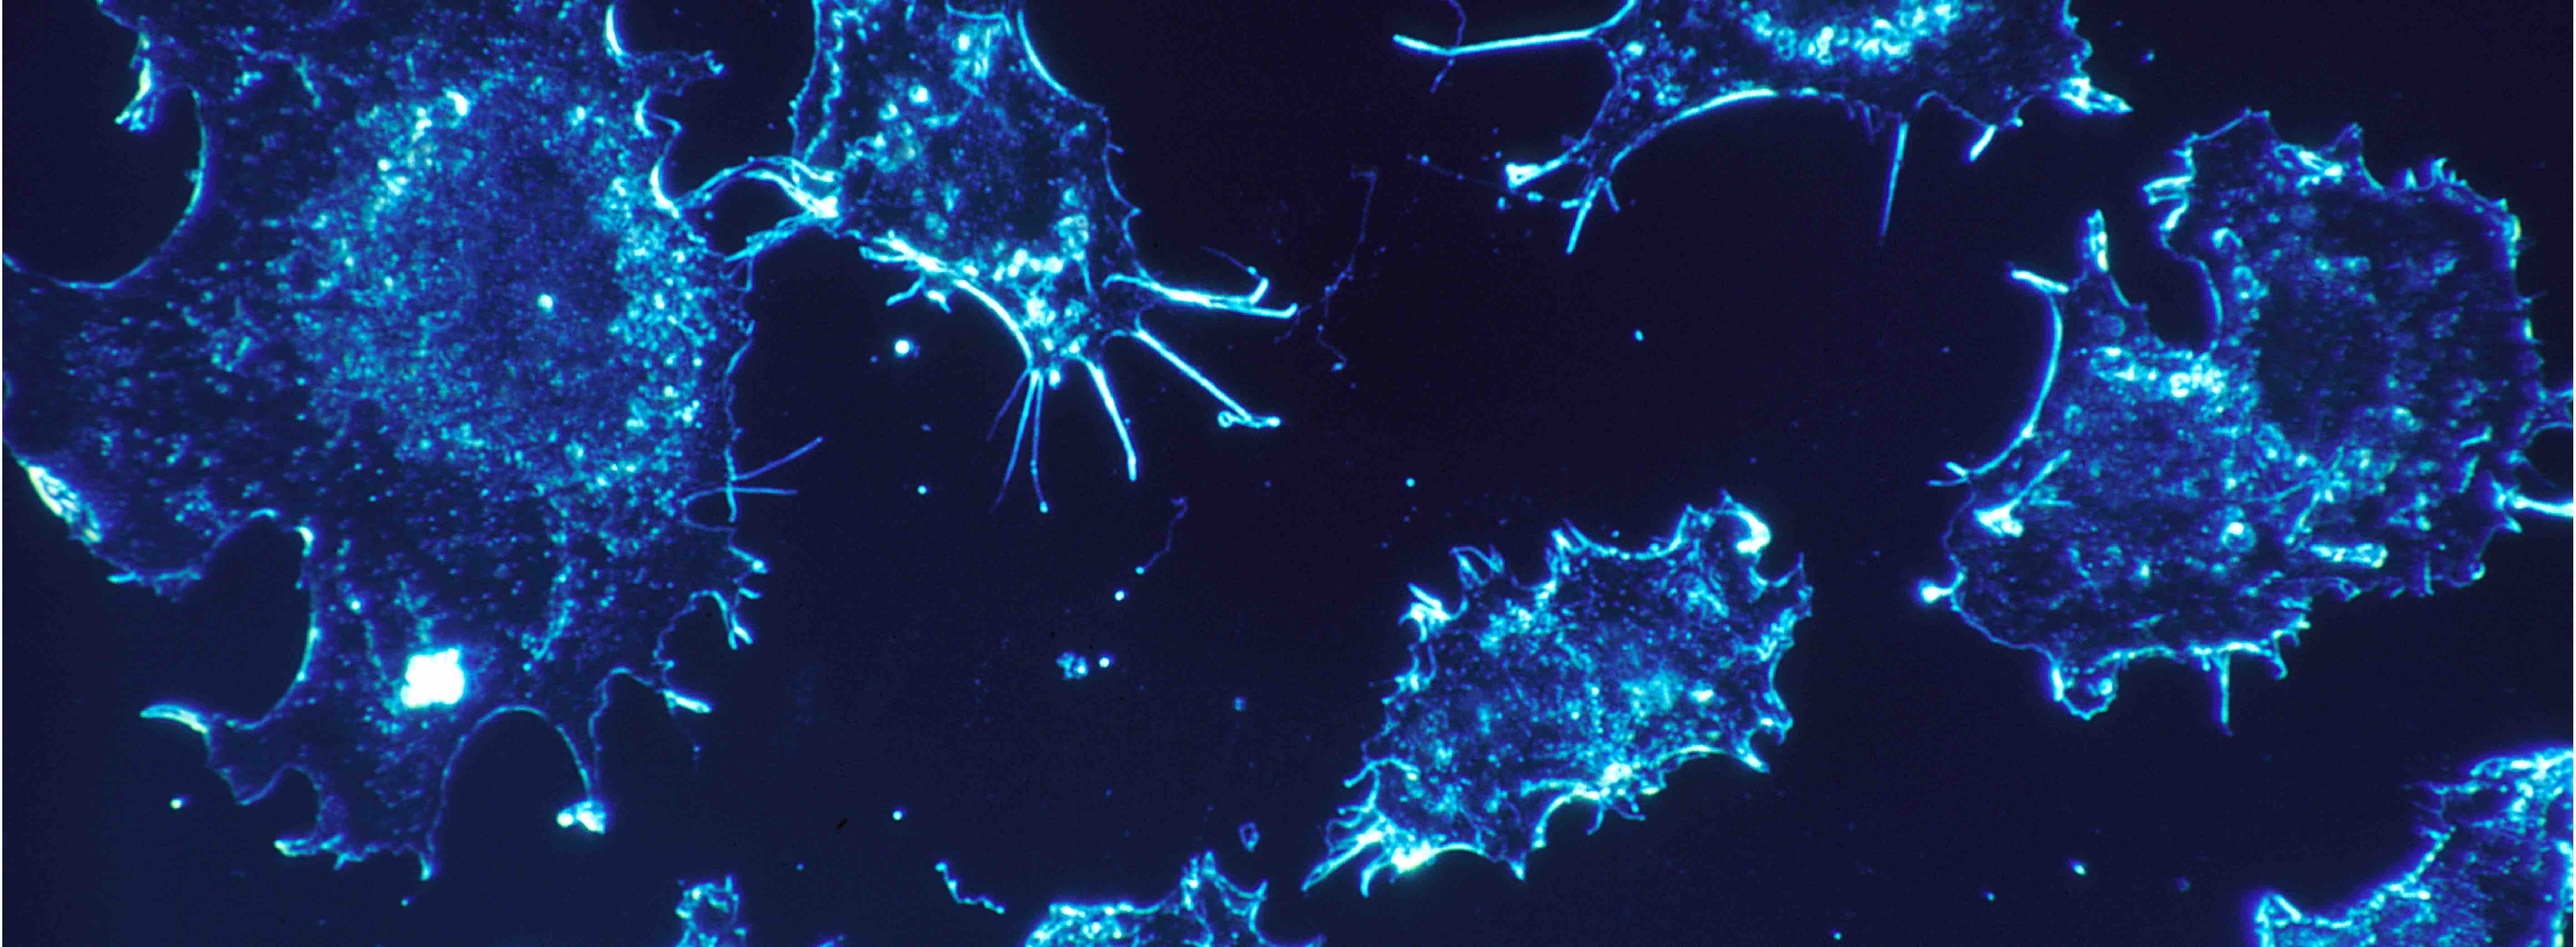 Microscope image of cancer cells that have been colored blue